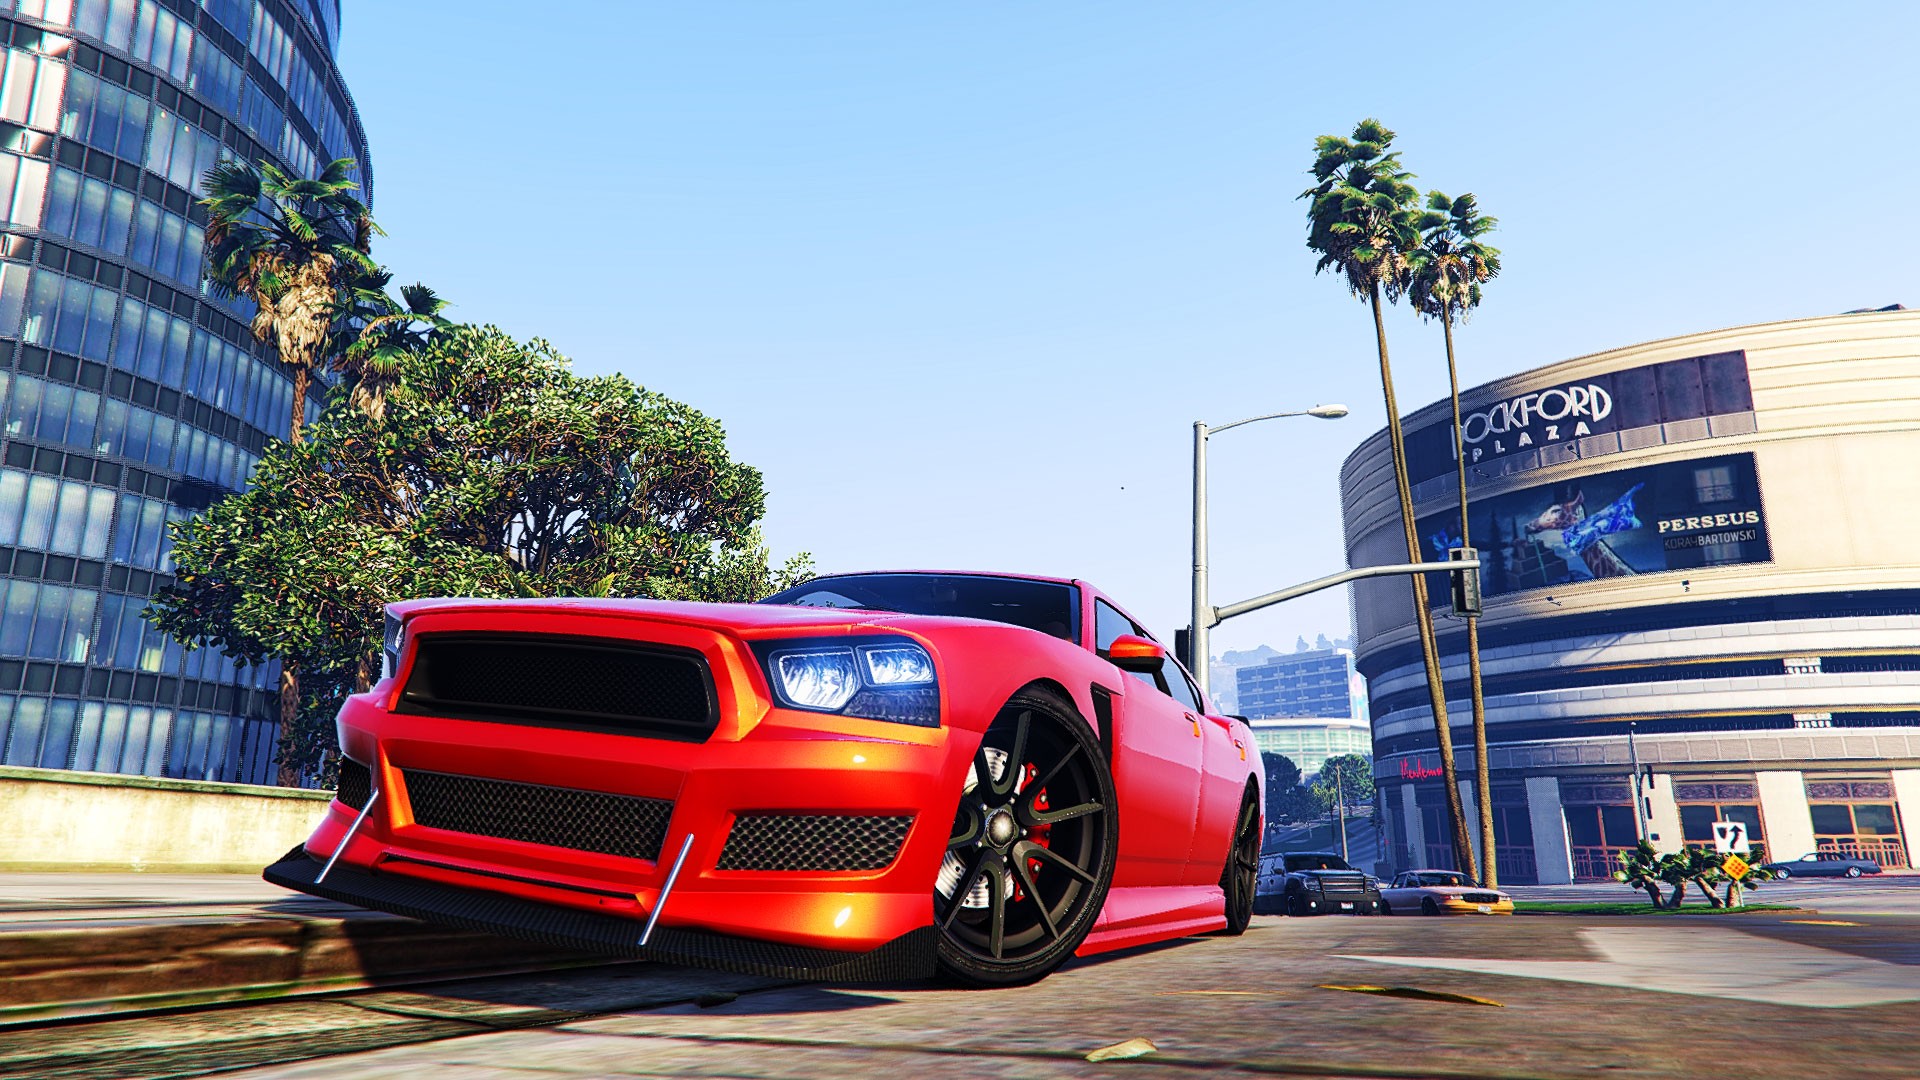 General 1920x1080 Grand Theft Auto V car building video games PC gaming screen shot red cars vehicle